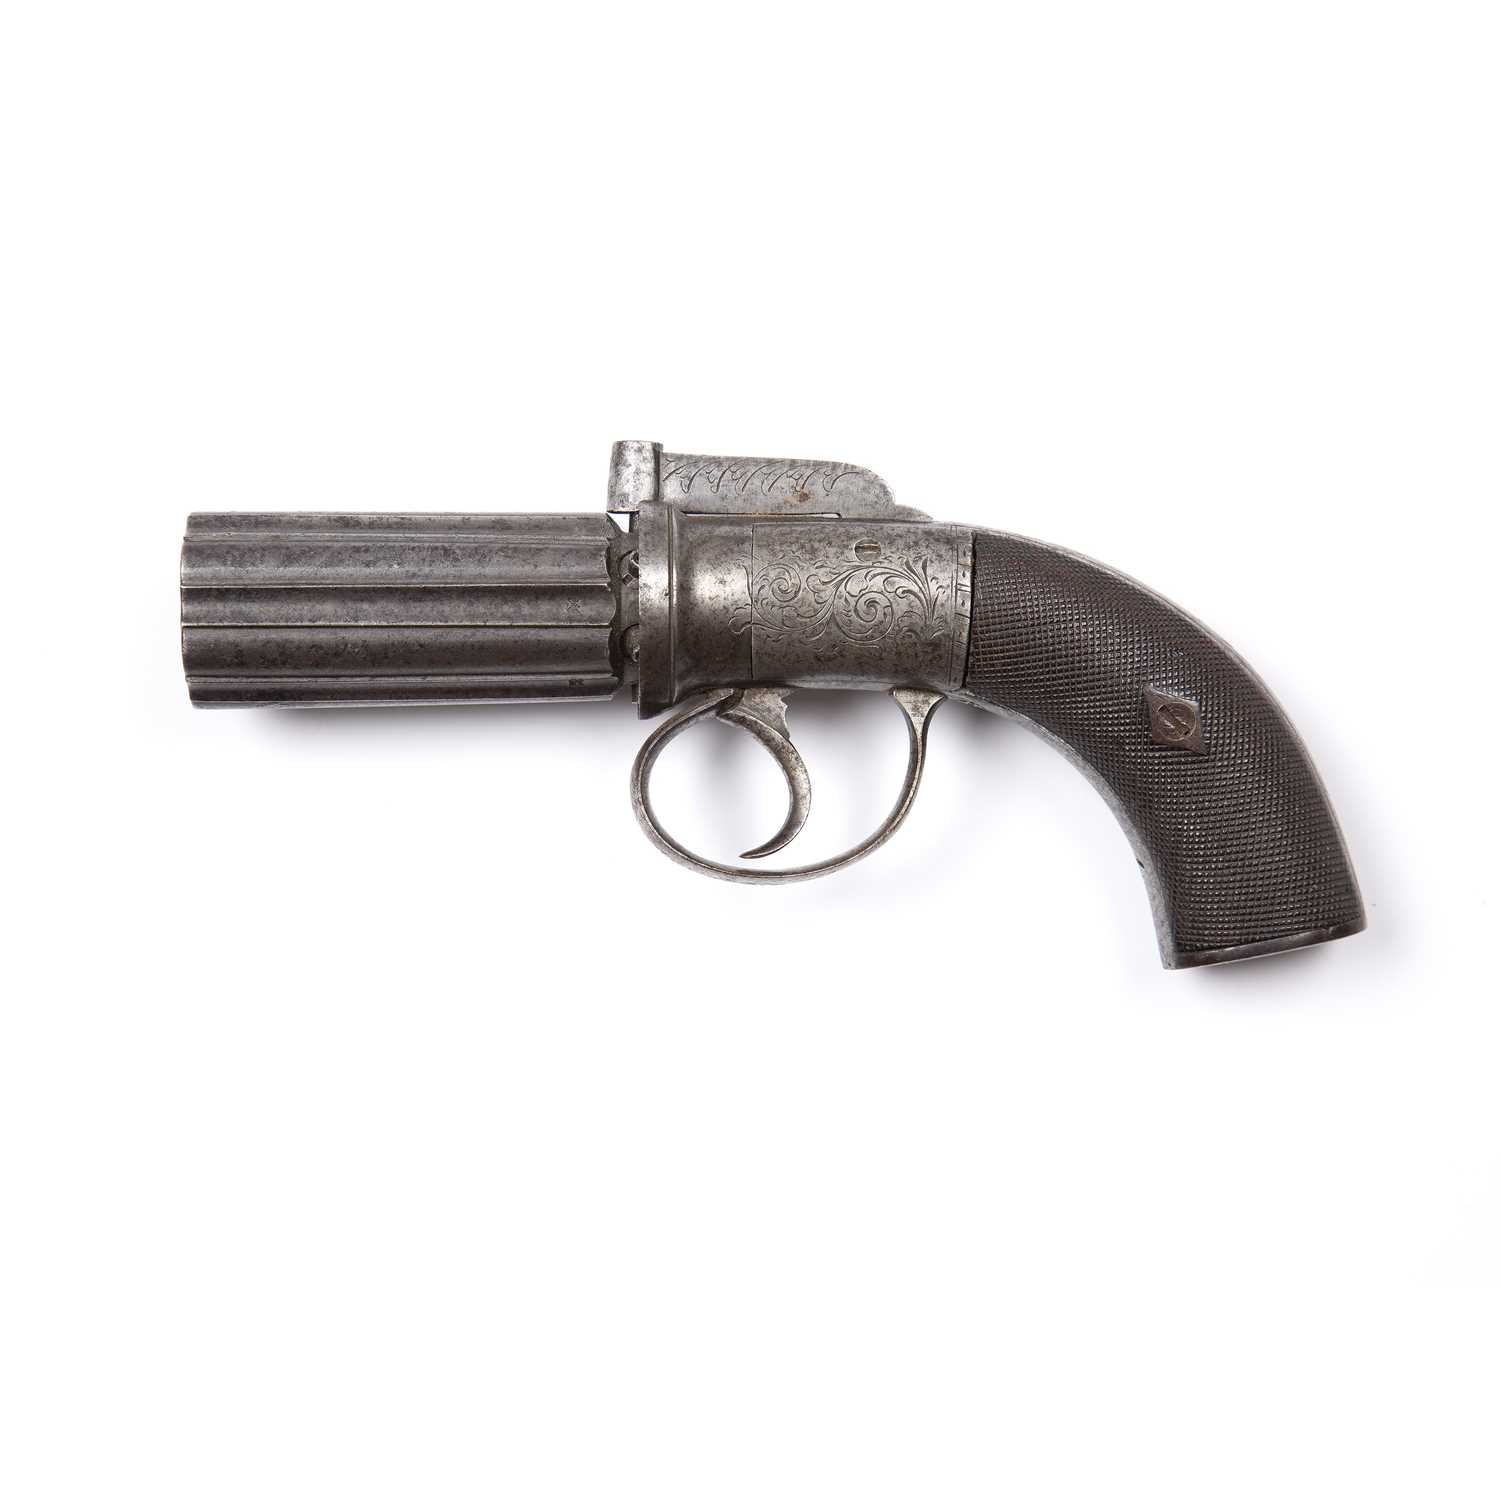 A 19th century Wilkinson percussion pepper box six shot steel pistol with engraved decoration,